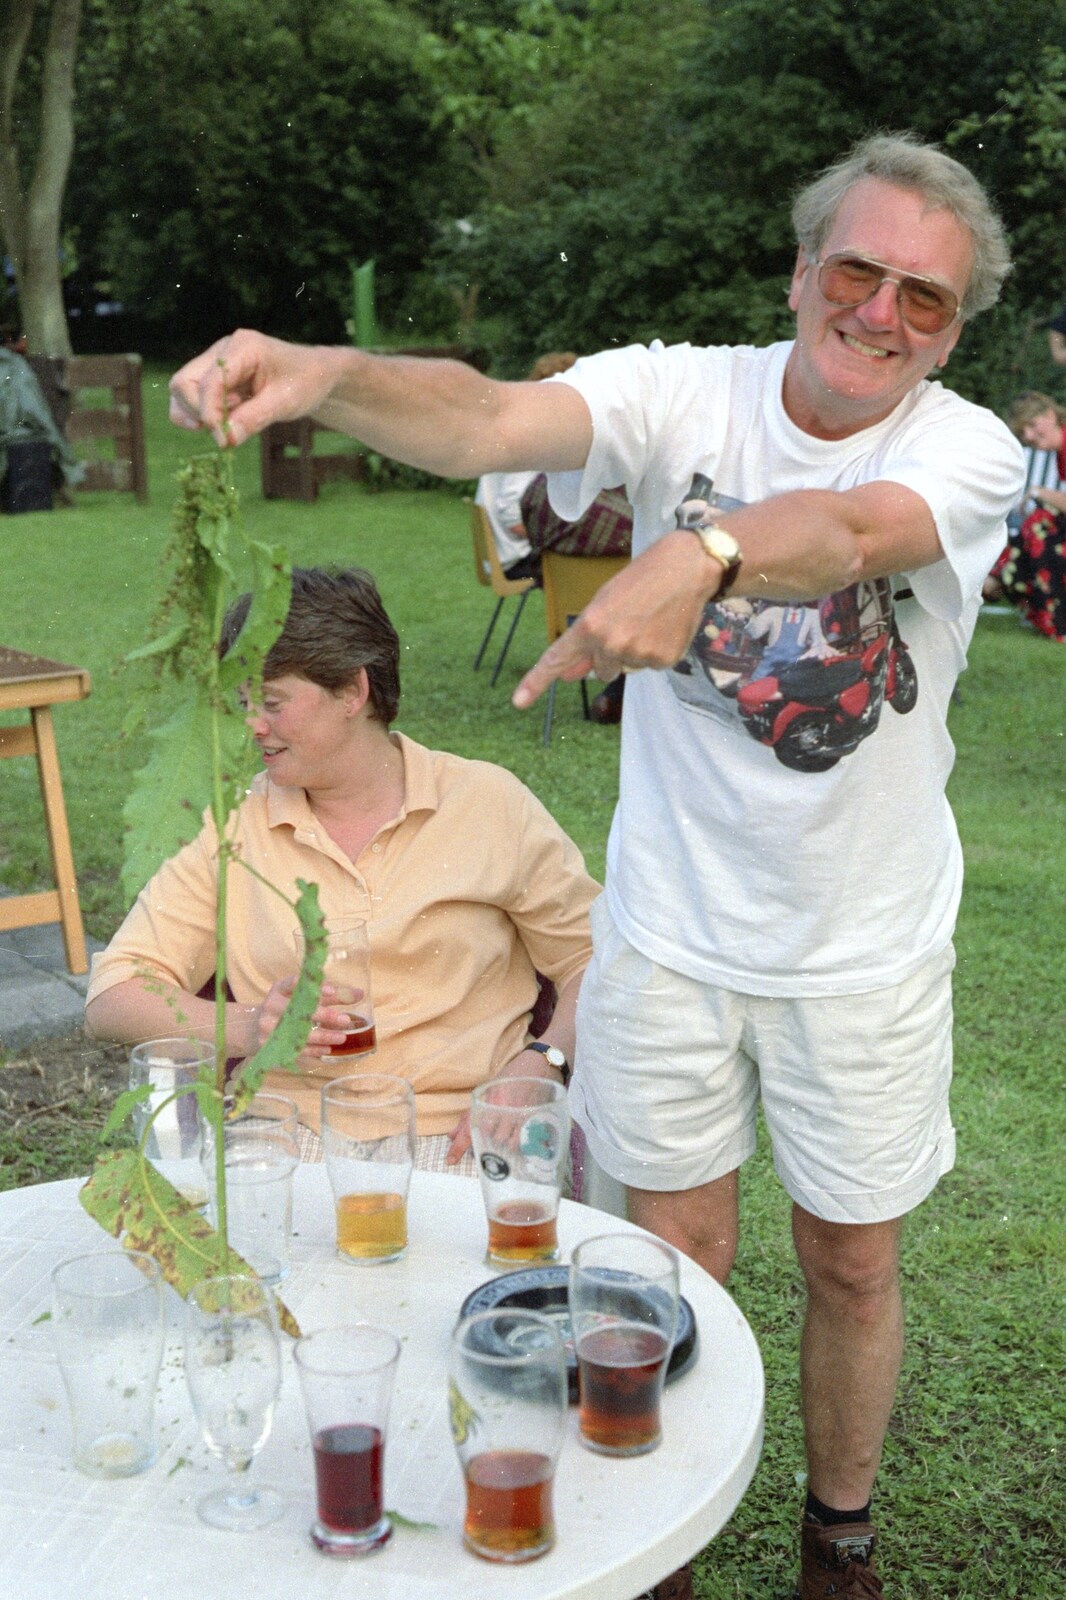 John Willy's dug a weed up from the garden from DH's Barbeque at The Swan Inn, Brome, Suffolk - July 14th 1996